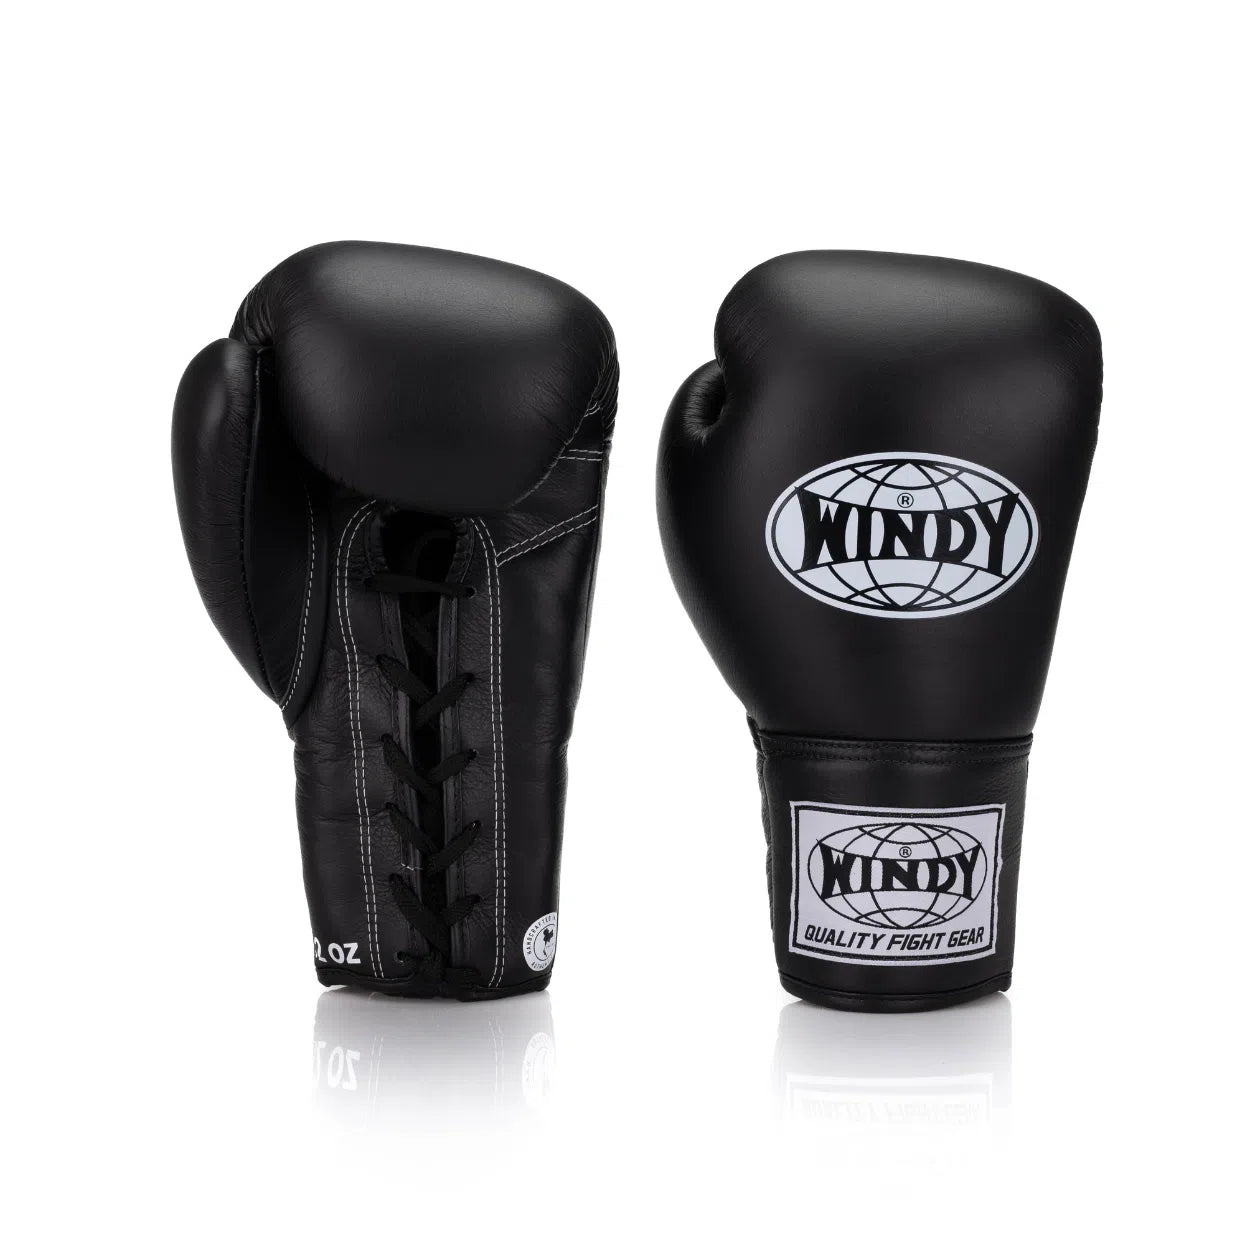 Classic Lace-Up Leather Boxing Glove - Black